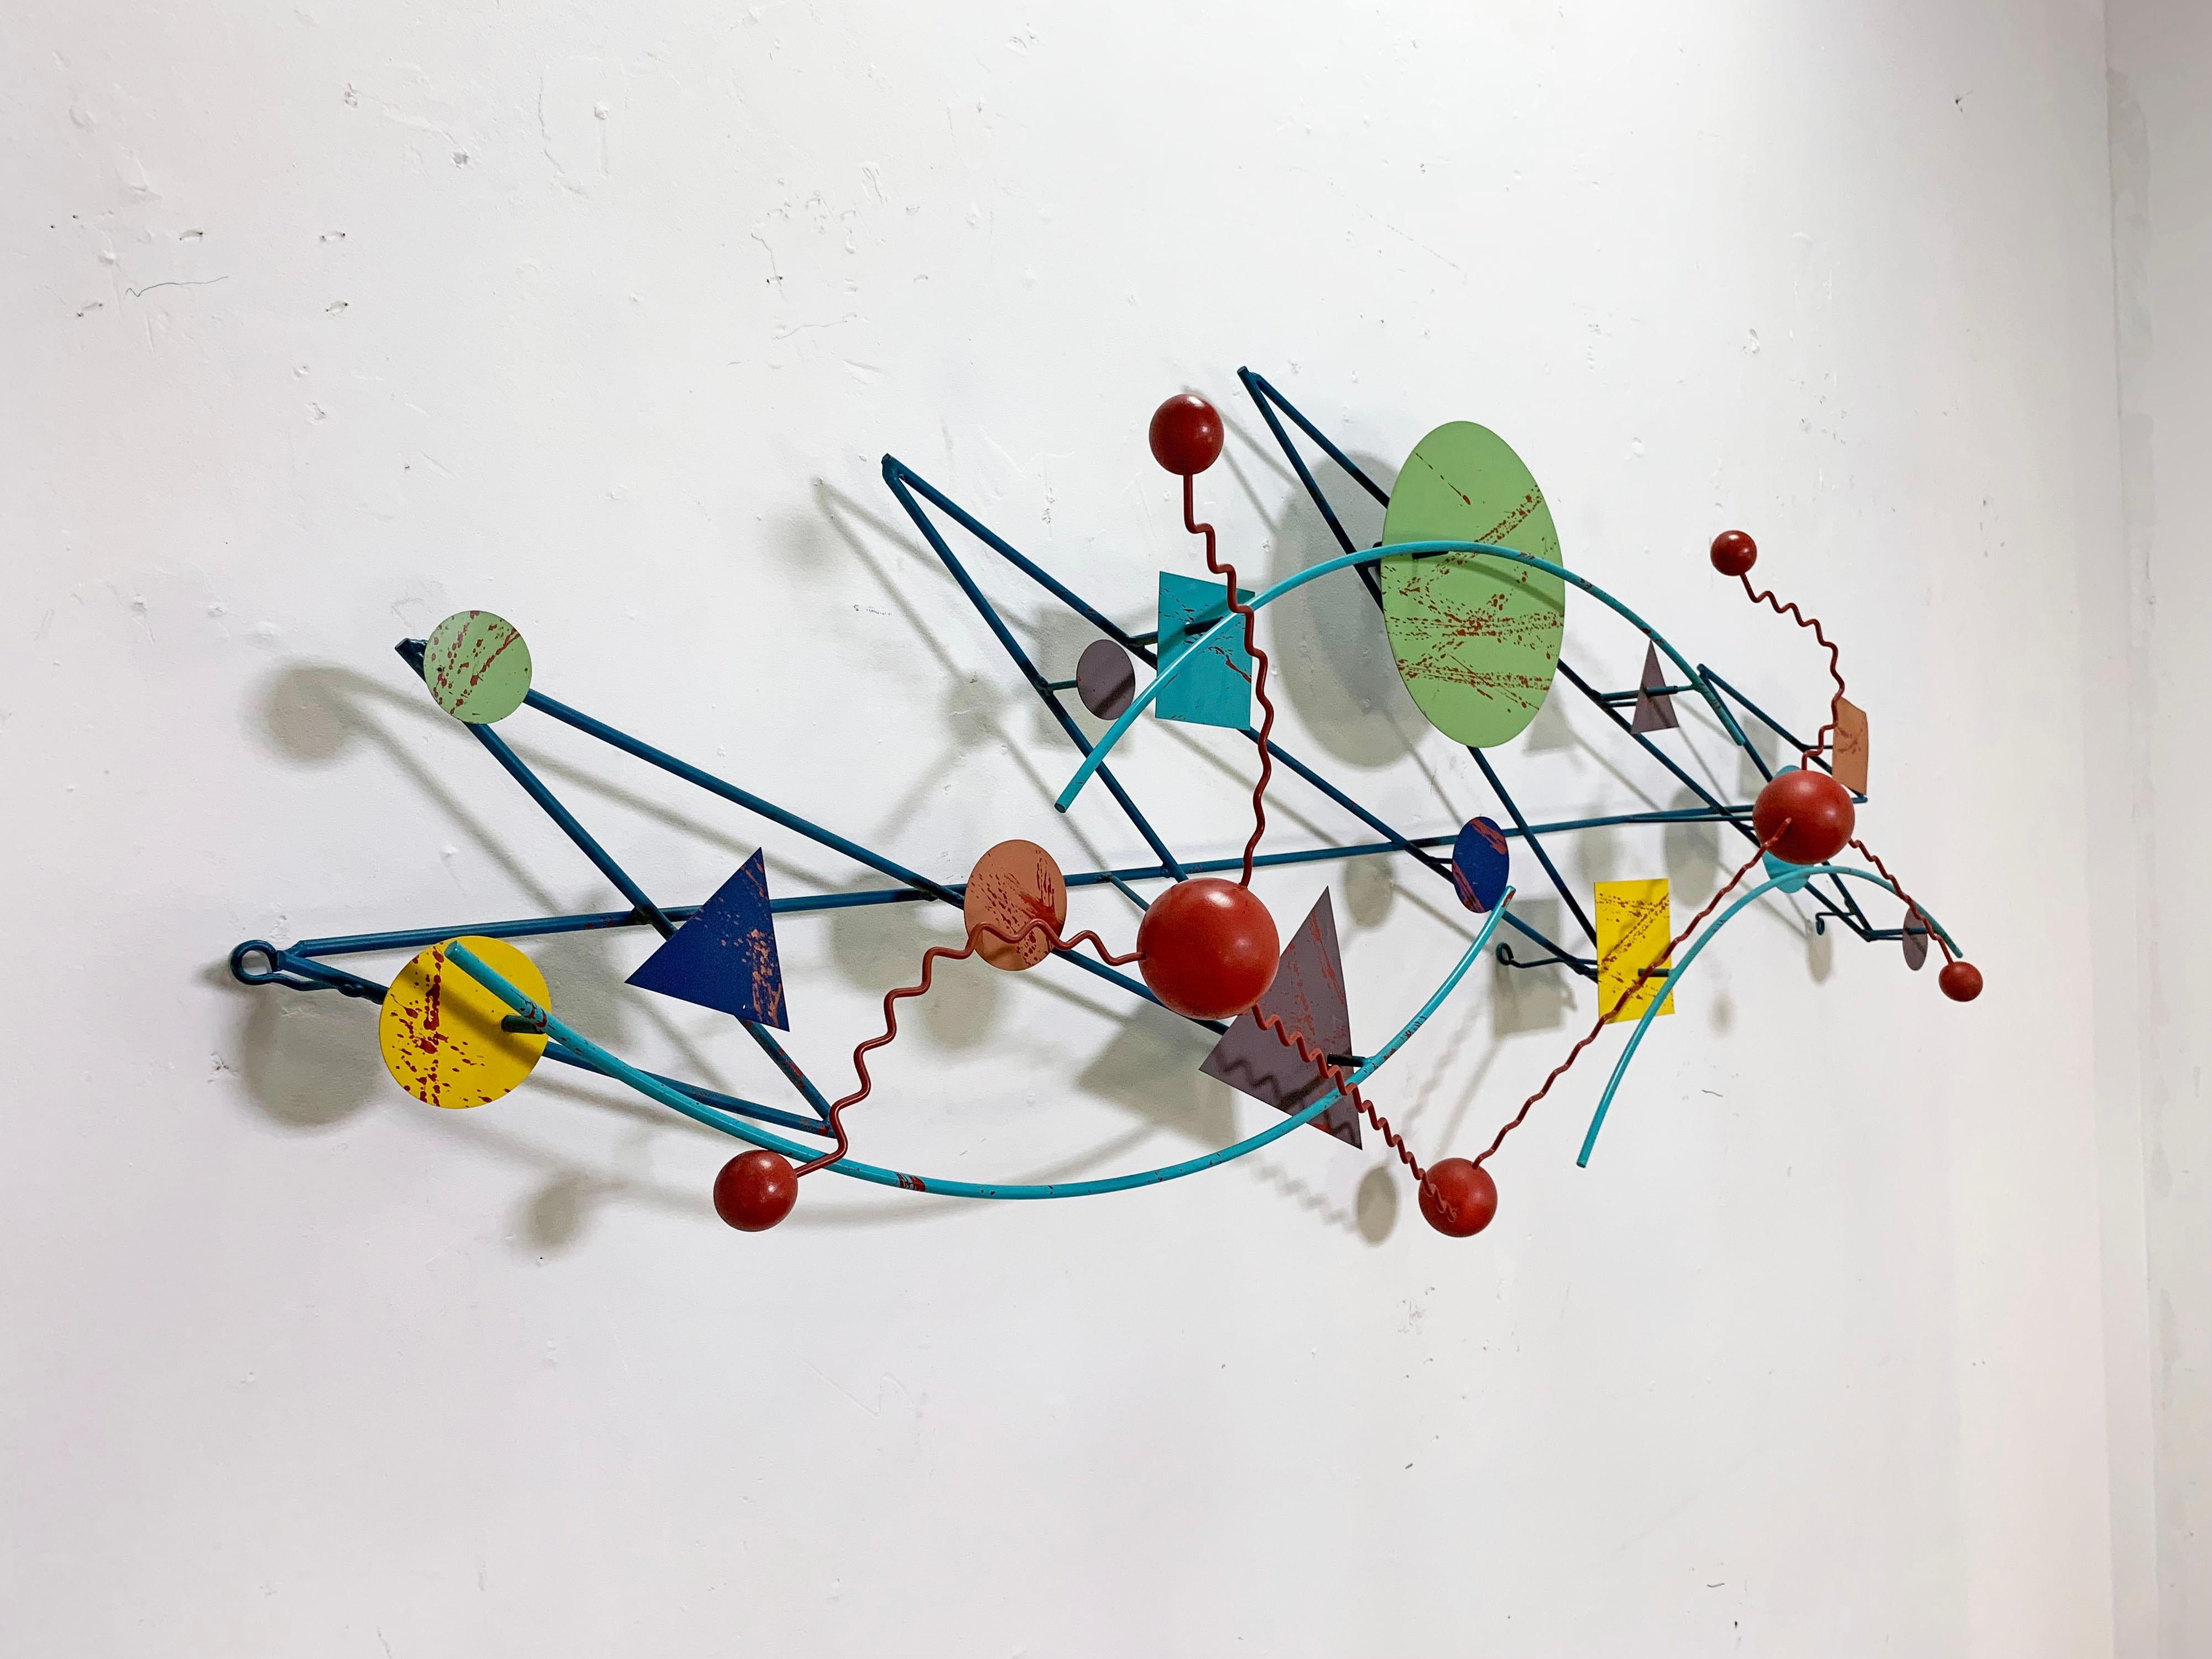 Post-Modern C. Jere Memphis Movement Inspired Abstract Wall Sculpture, Dated 1988